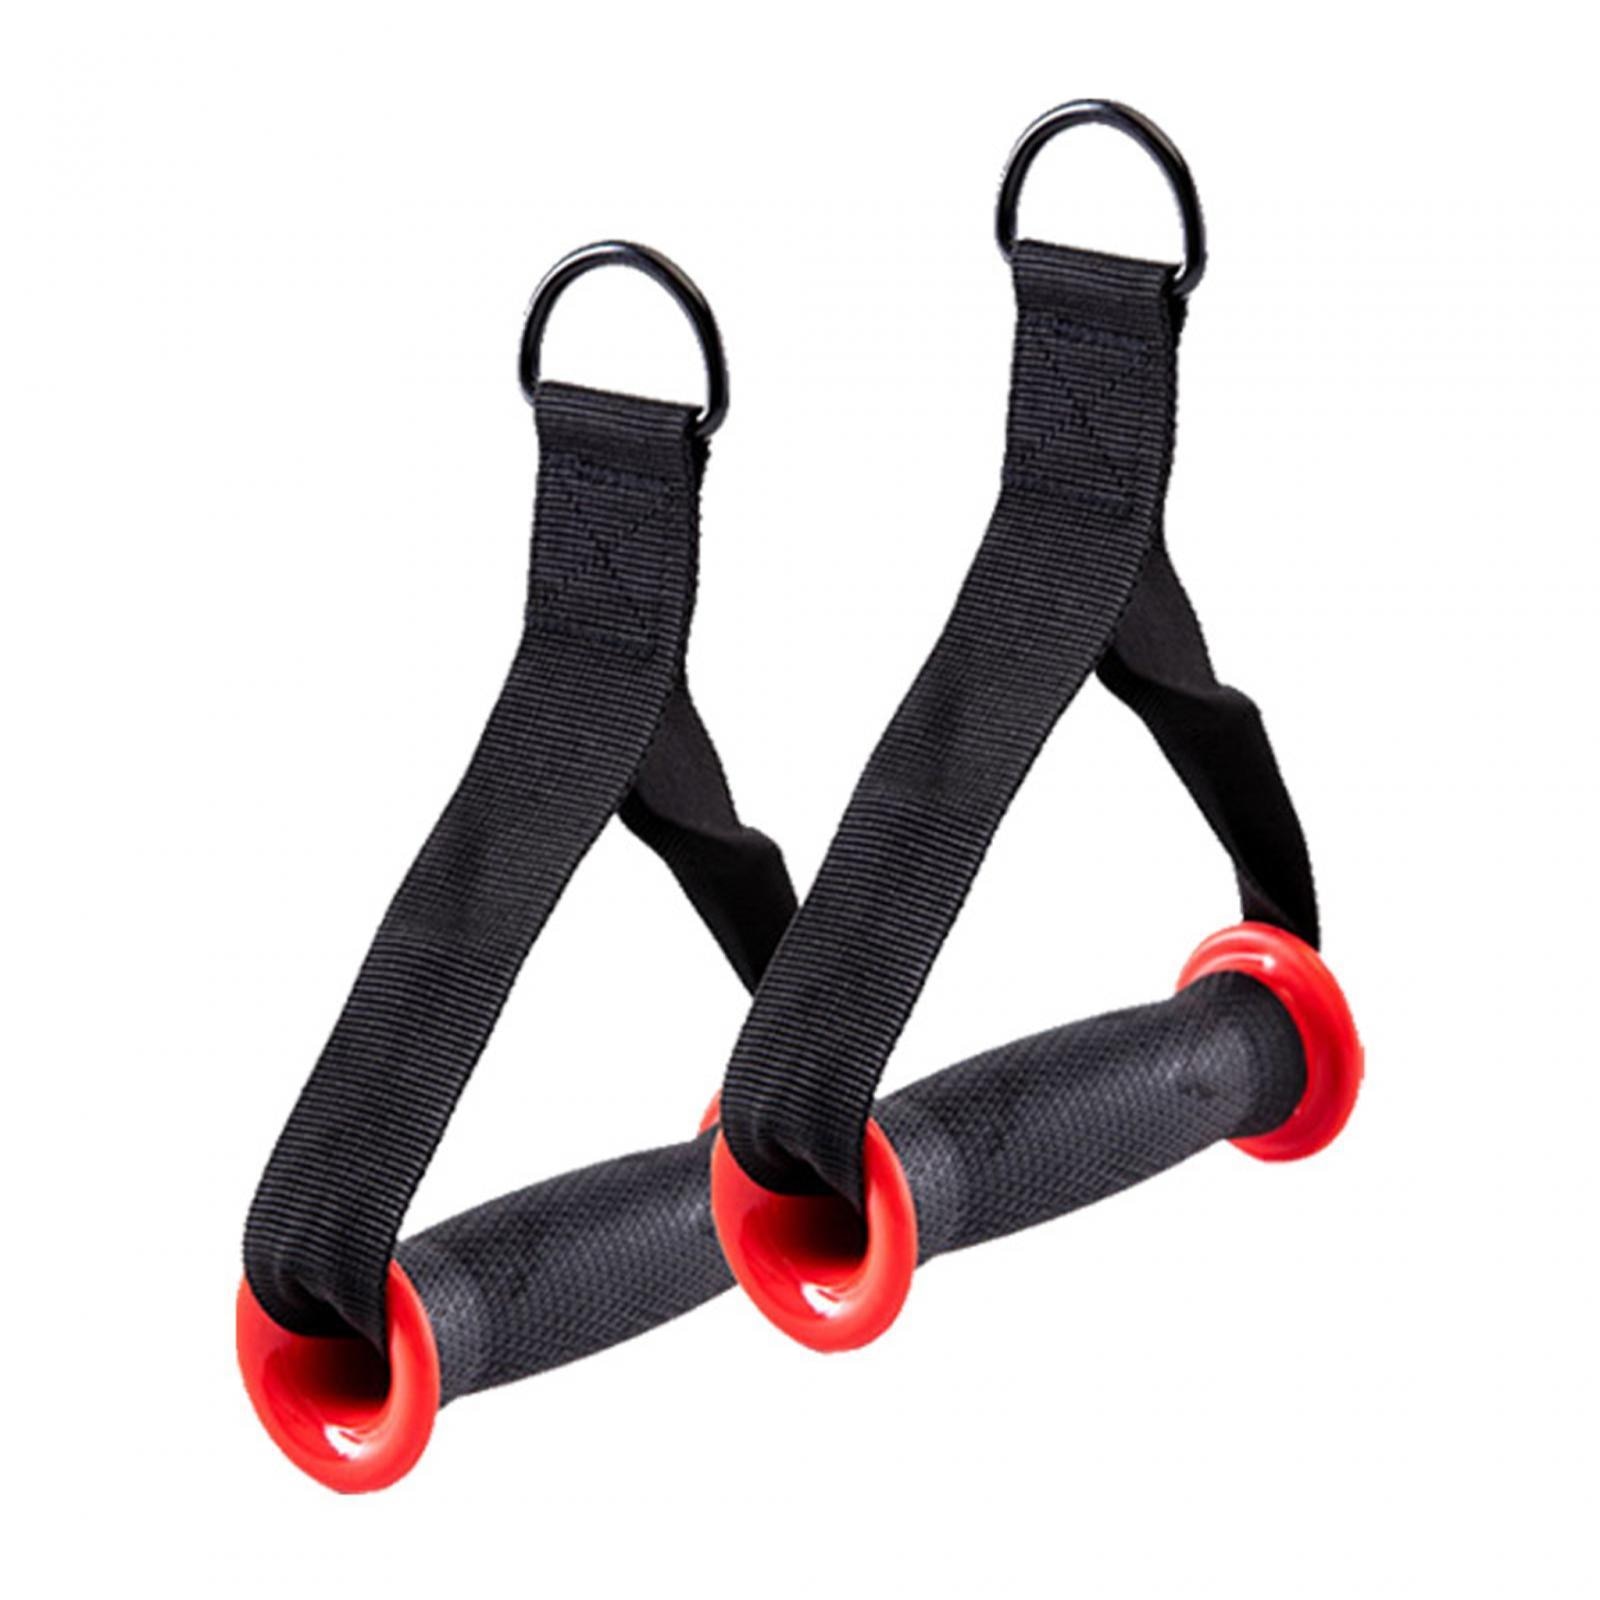 2Pcs Cable Machine Attachment Handles Stretch Tube Workout Lat Row Bar Heavy Duty Gym Accessory Pull Band Handles Fitness Straps